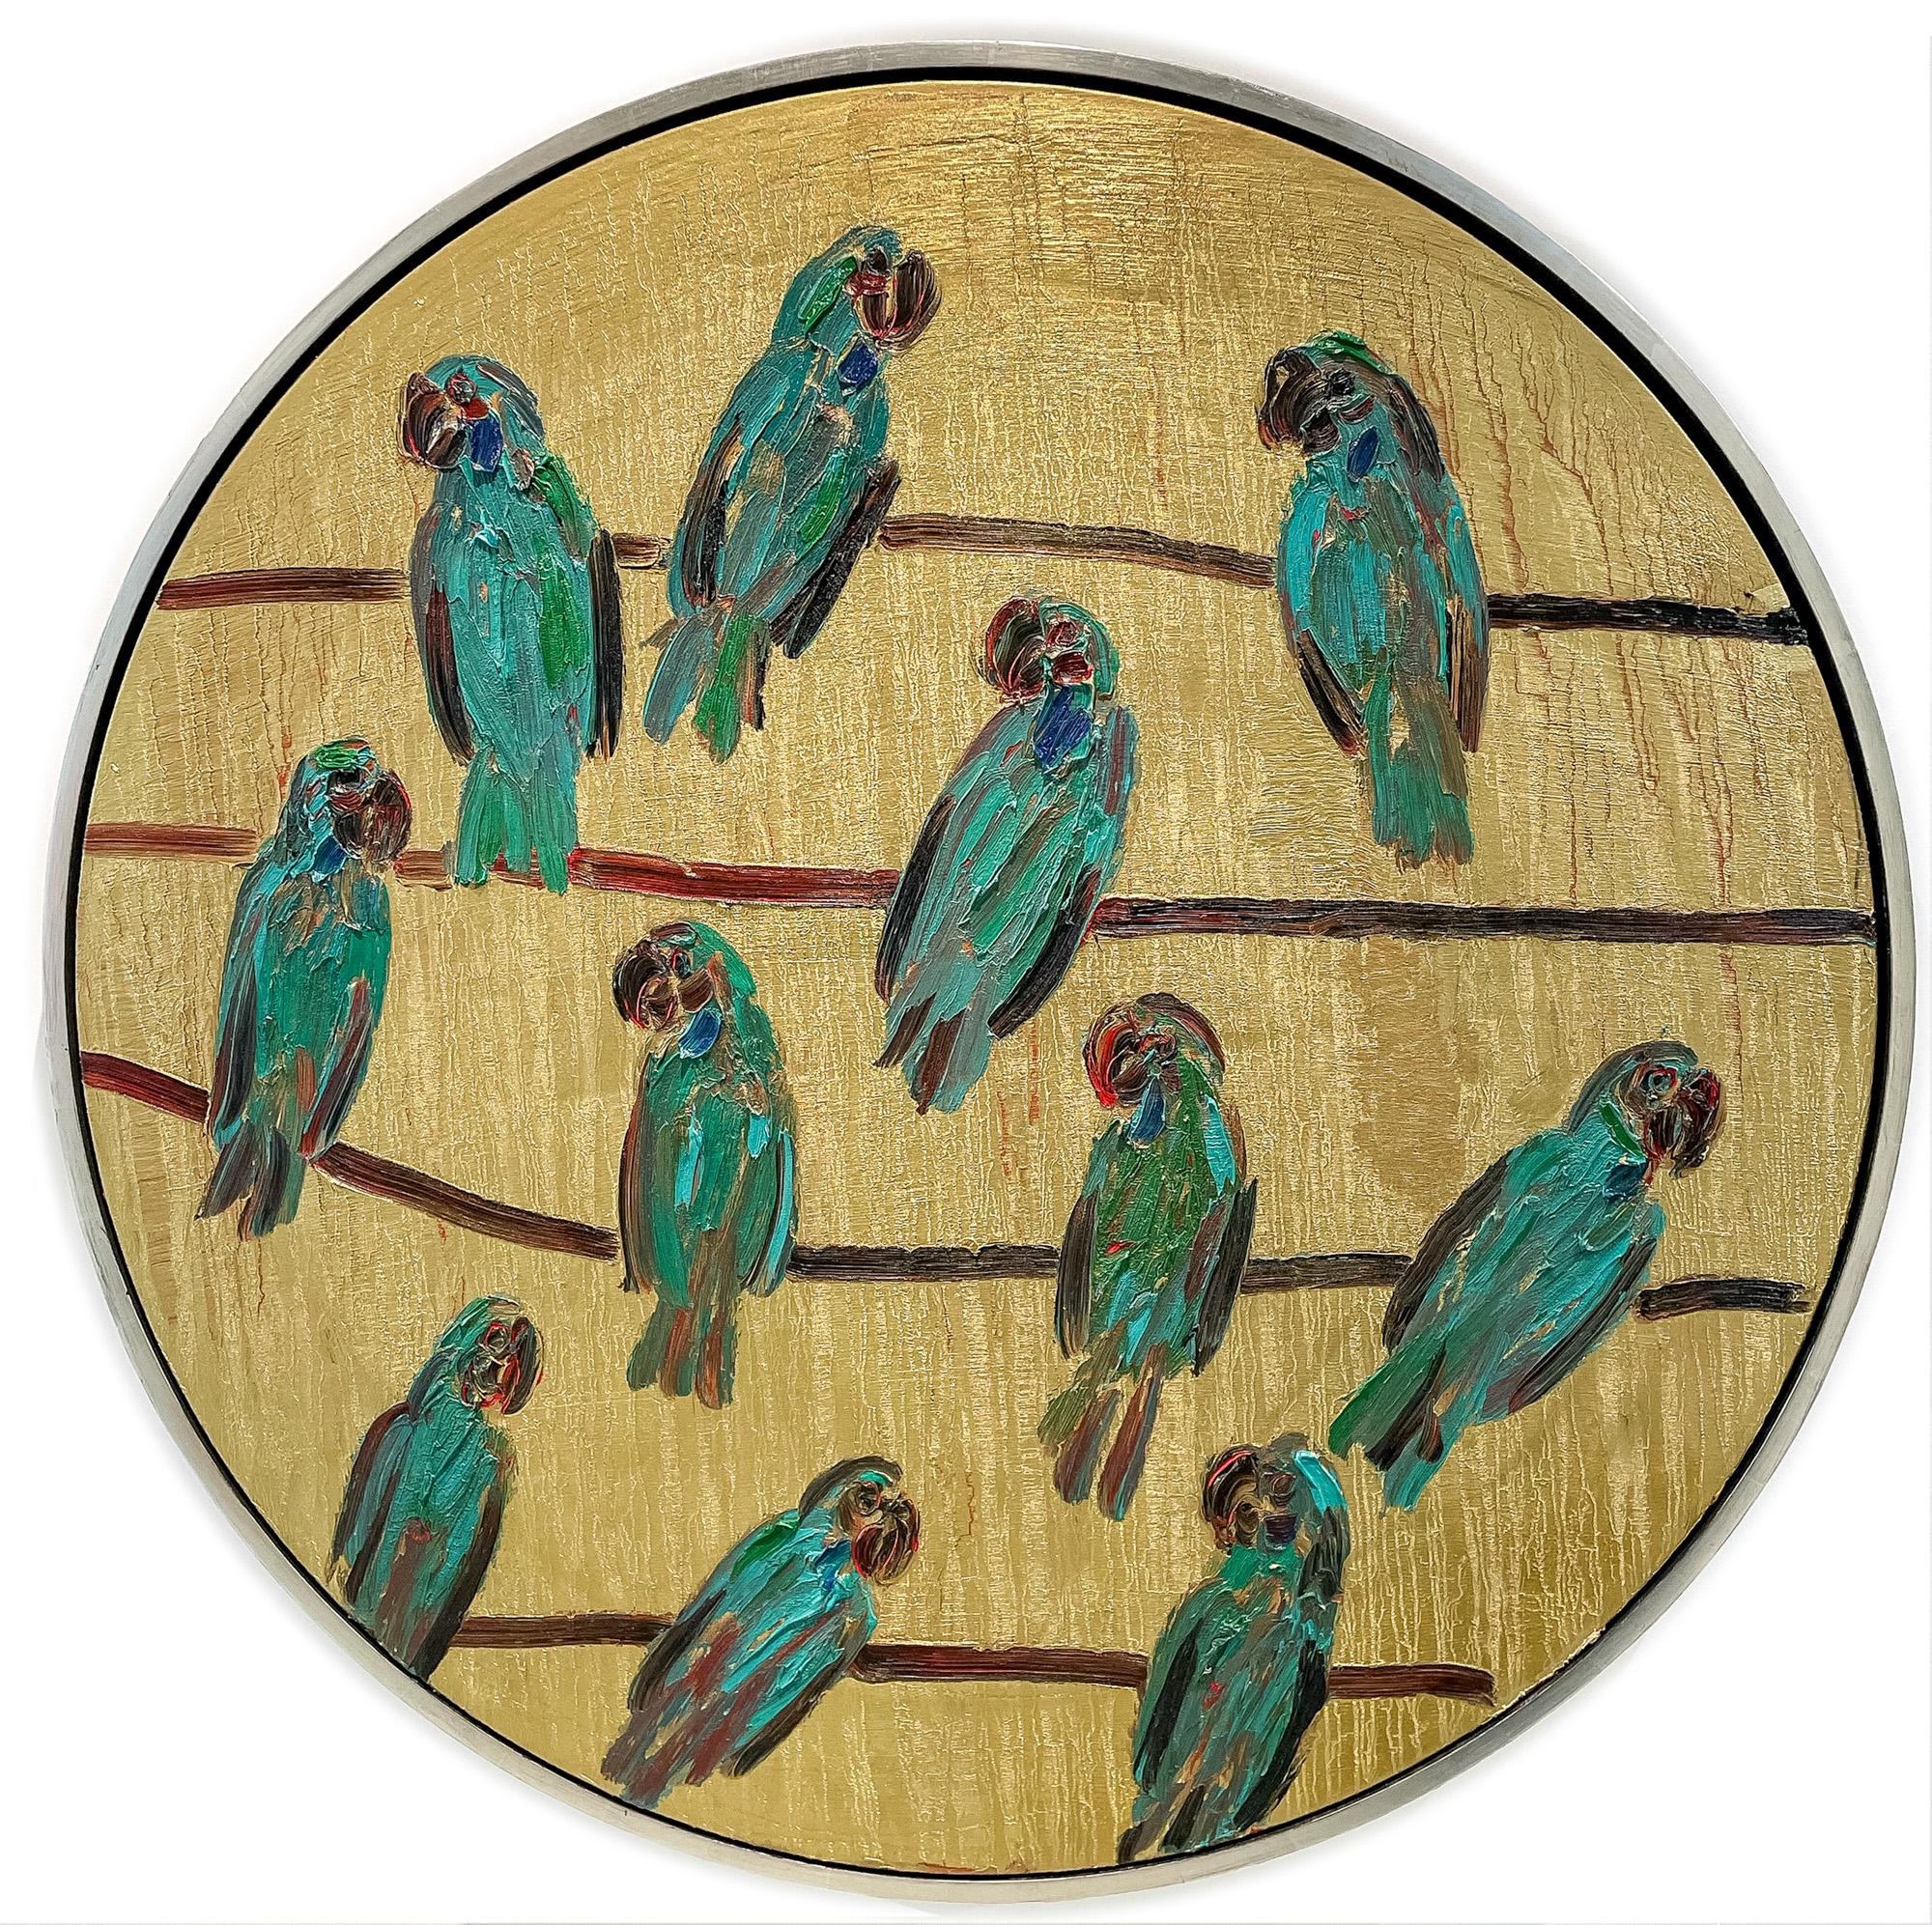 "Blue Front Amazon" is a Neo-Expressionist oil painting on a round canvas, depicting 11 parrots sitting on branches  surrounded with a golden background that amplifies the parrots colors. 

This piece is finished in a matte silver floater frame.